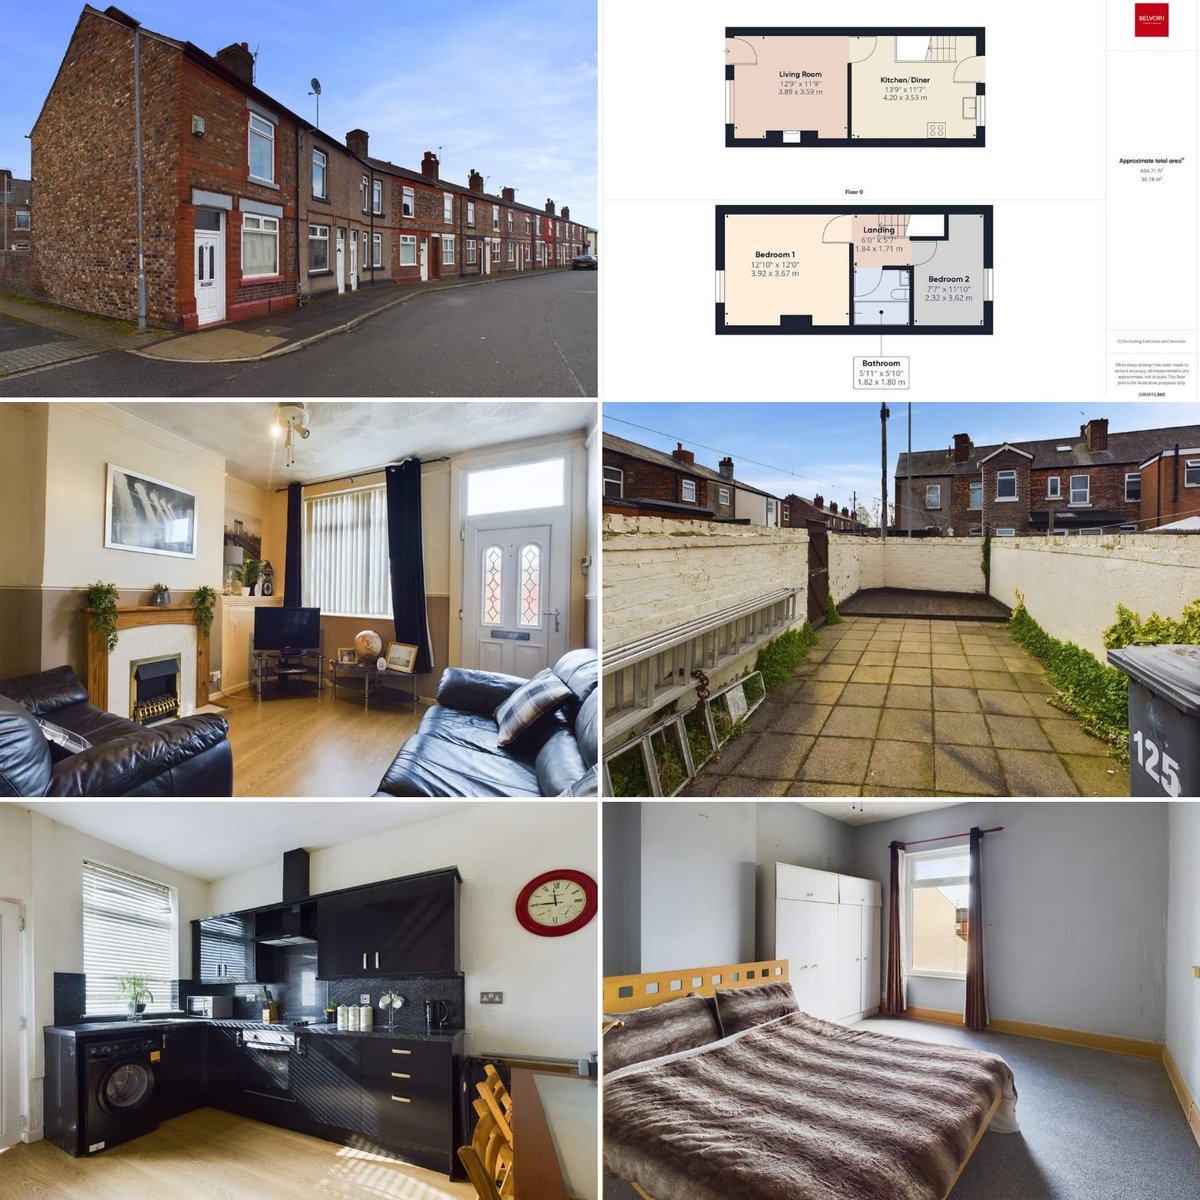 ✨✨✨New SALES Instruction✨✨✨ Wellington Street, Howley, Warrington, WA1 Price : £135,000 🏘 End Of Terraced House 🚗 Street Parking 🛏 2 Bedrooms Contact our friendly team on : Call : 01925 636 855 Email : sales.warrington@belvoir.co.uk